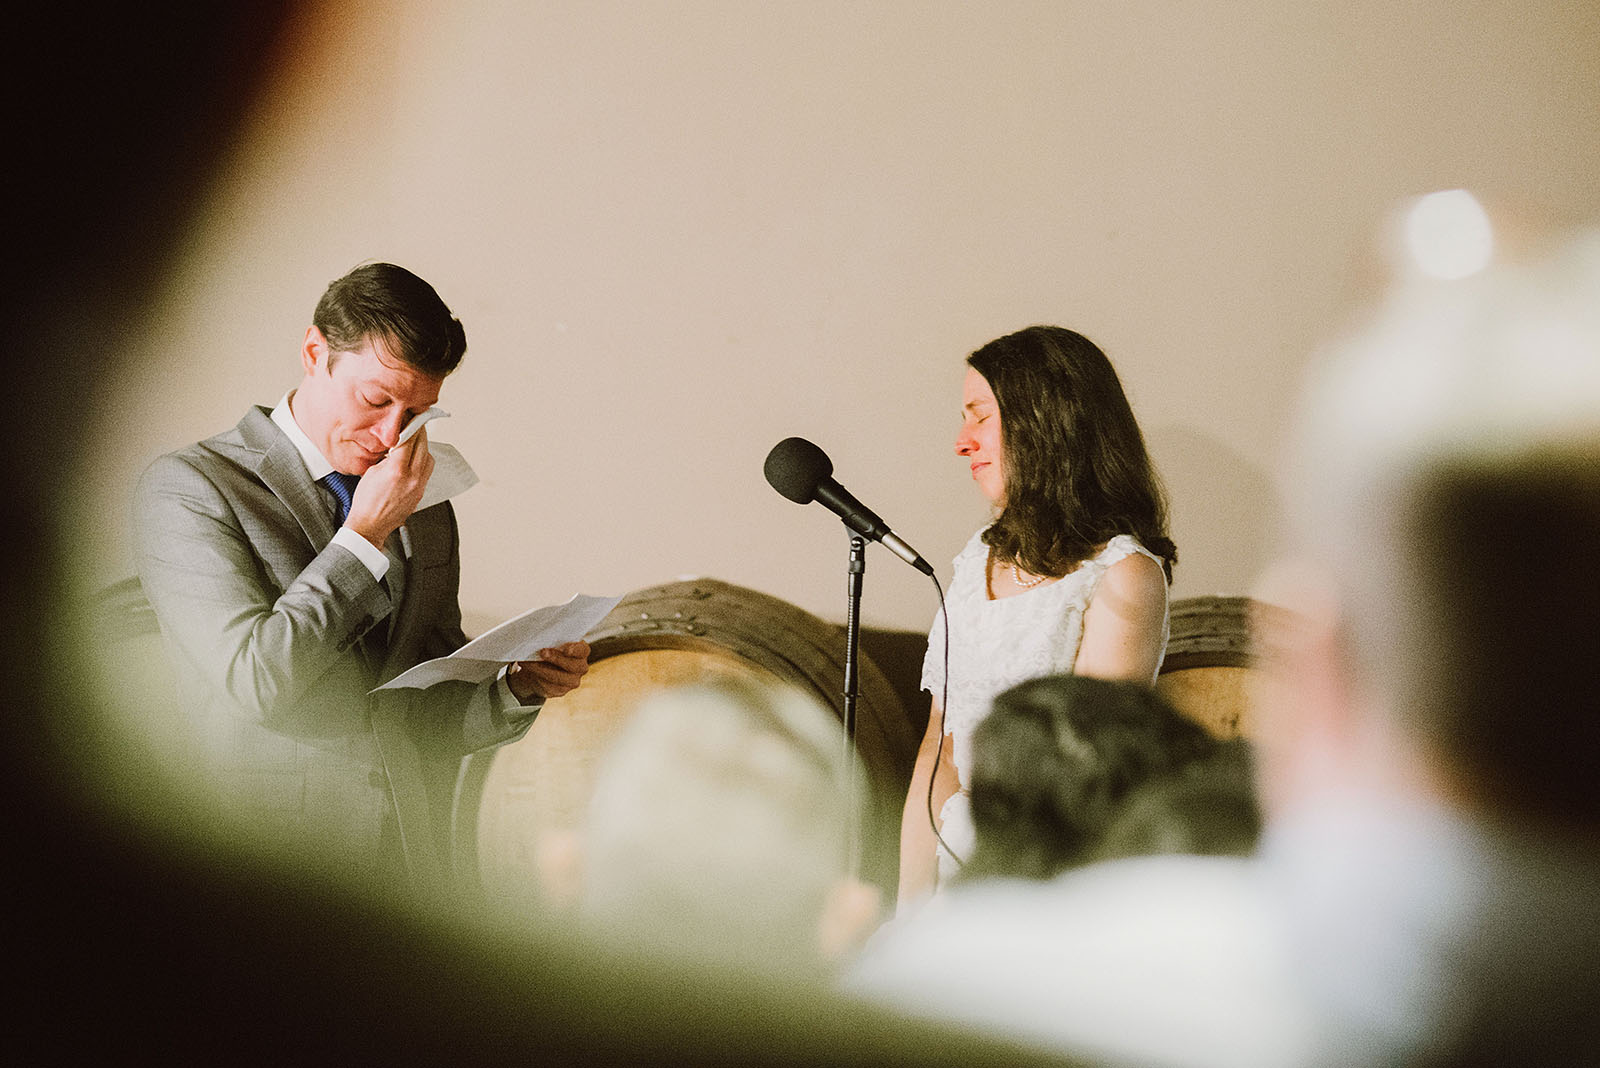 Groom crying during vows at an Intimate Restaurant Wedding in Portland, OR